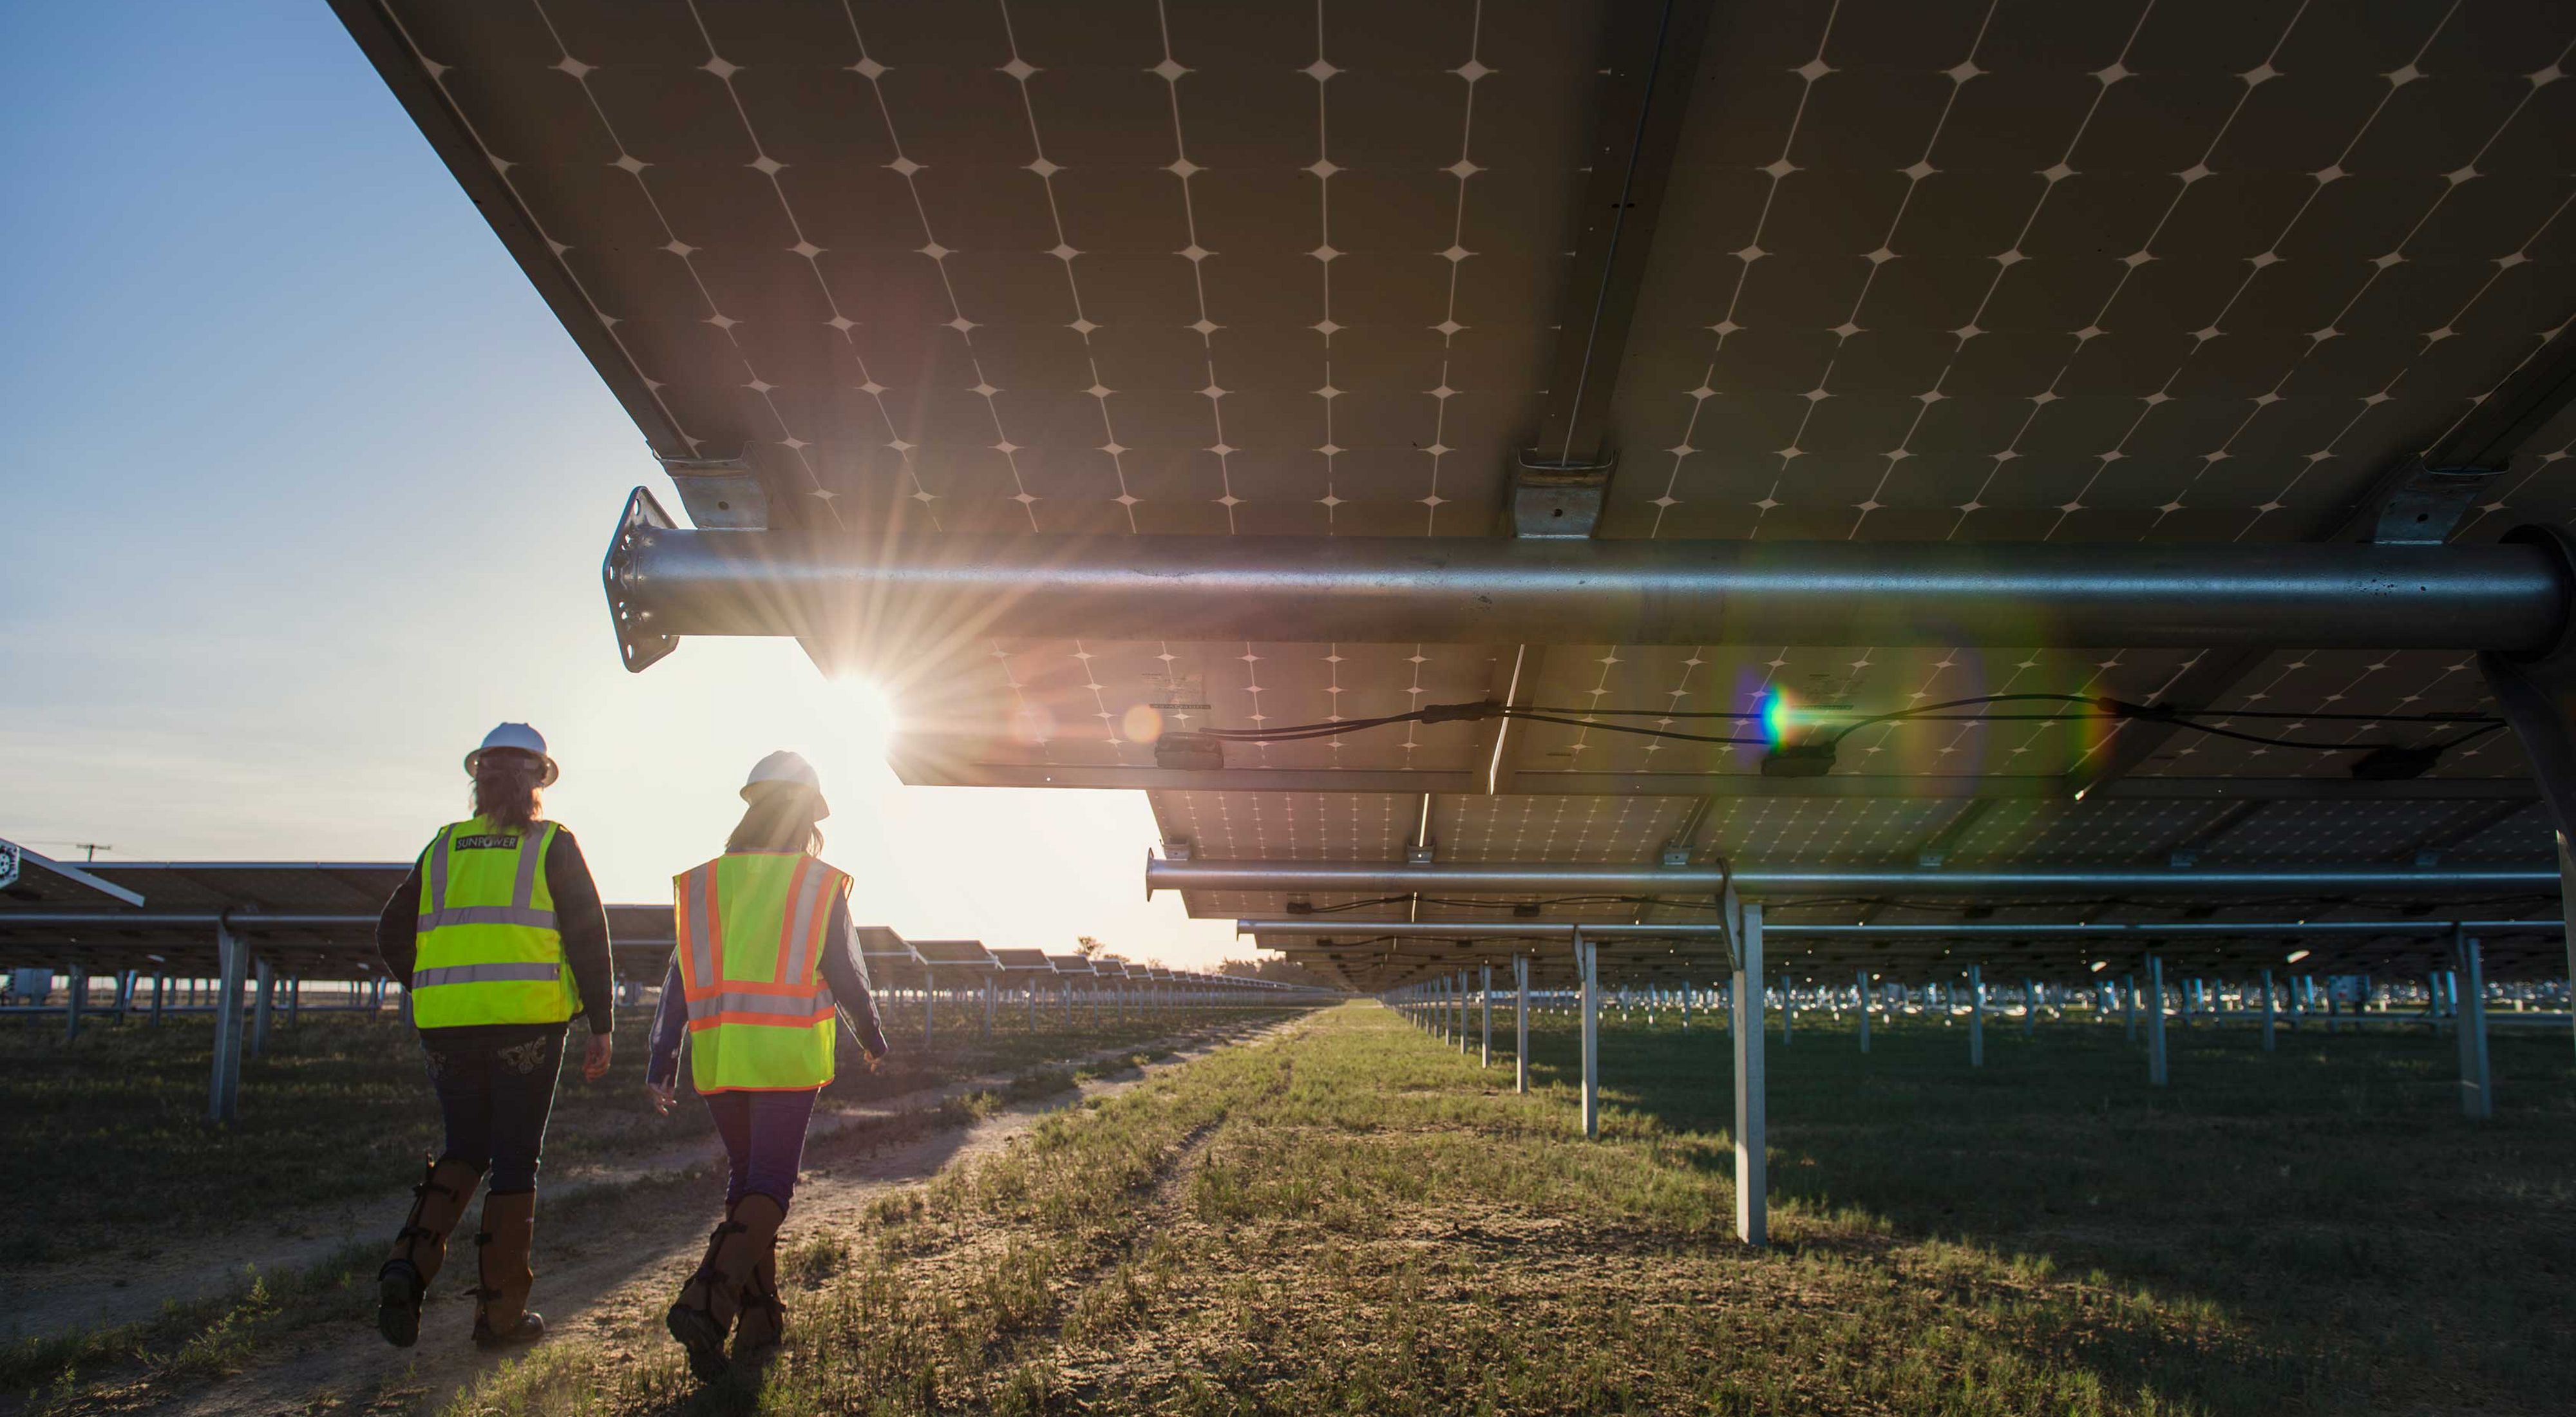 Two people wearing safety vests and hard hats walk alongside an array of solar panels.